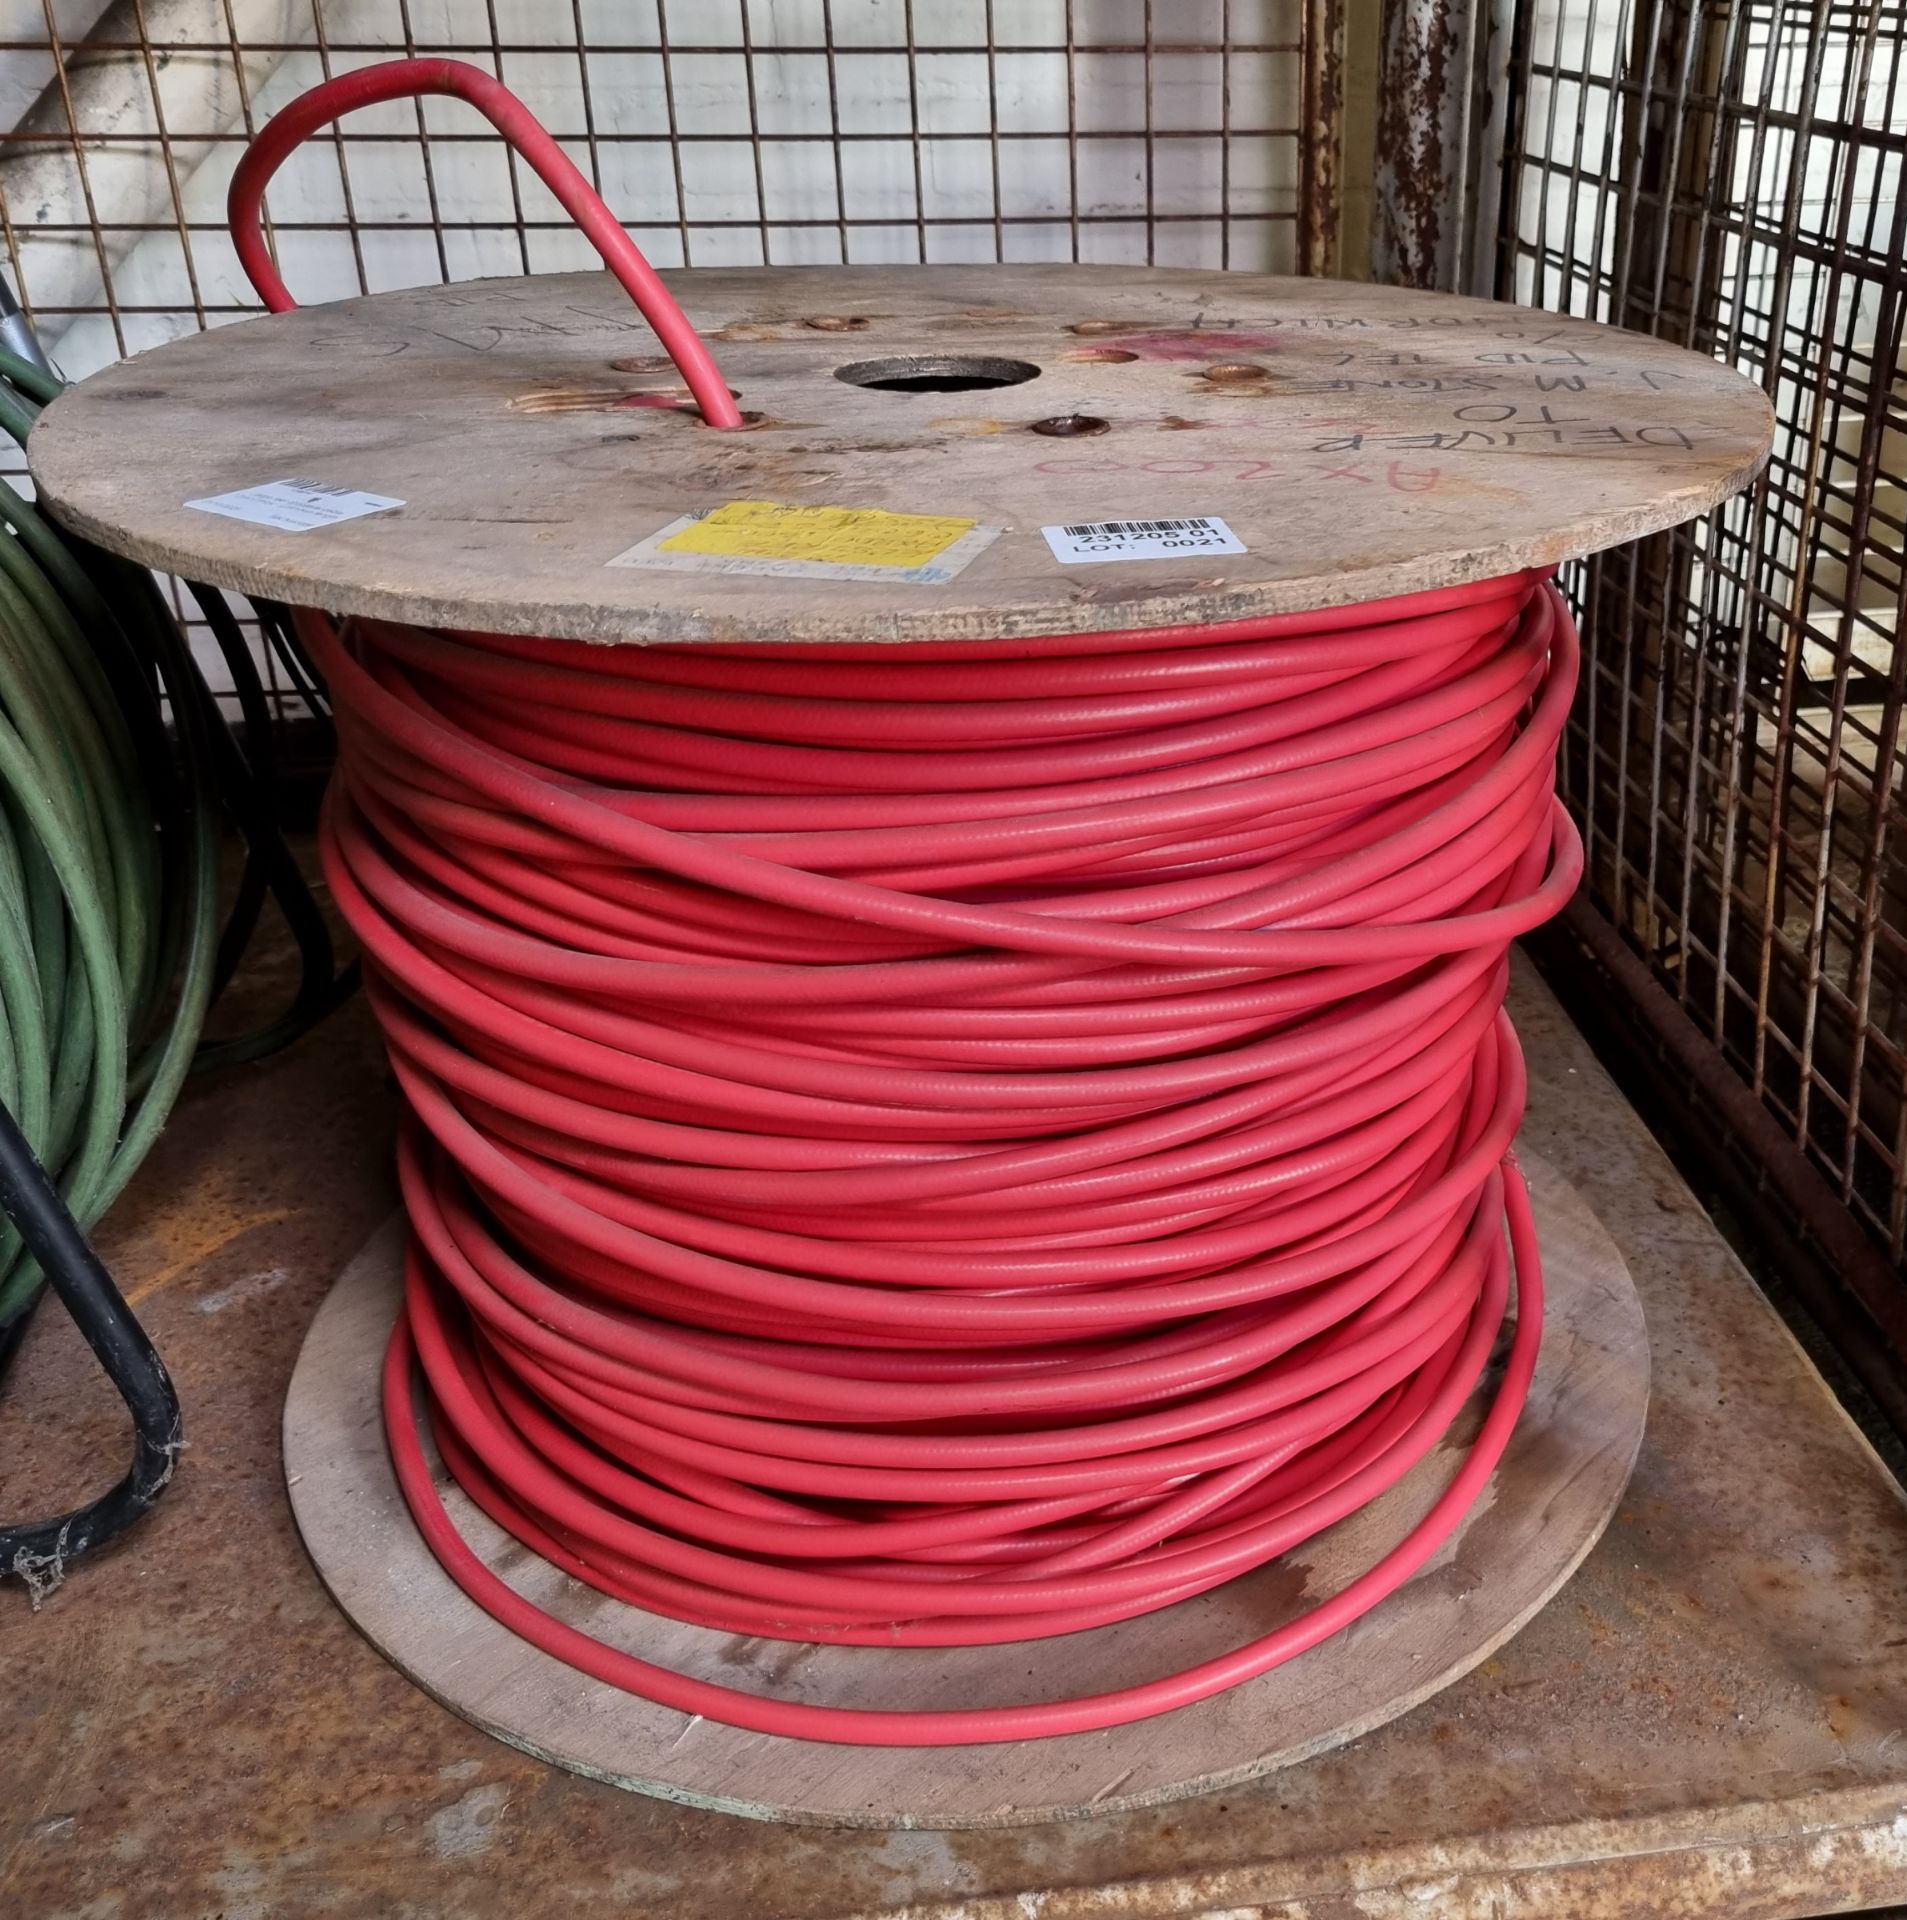 Large reel of AX200 coaxial cable 10mm thick - unknown length